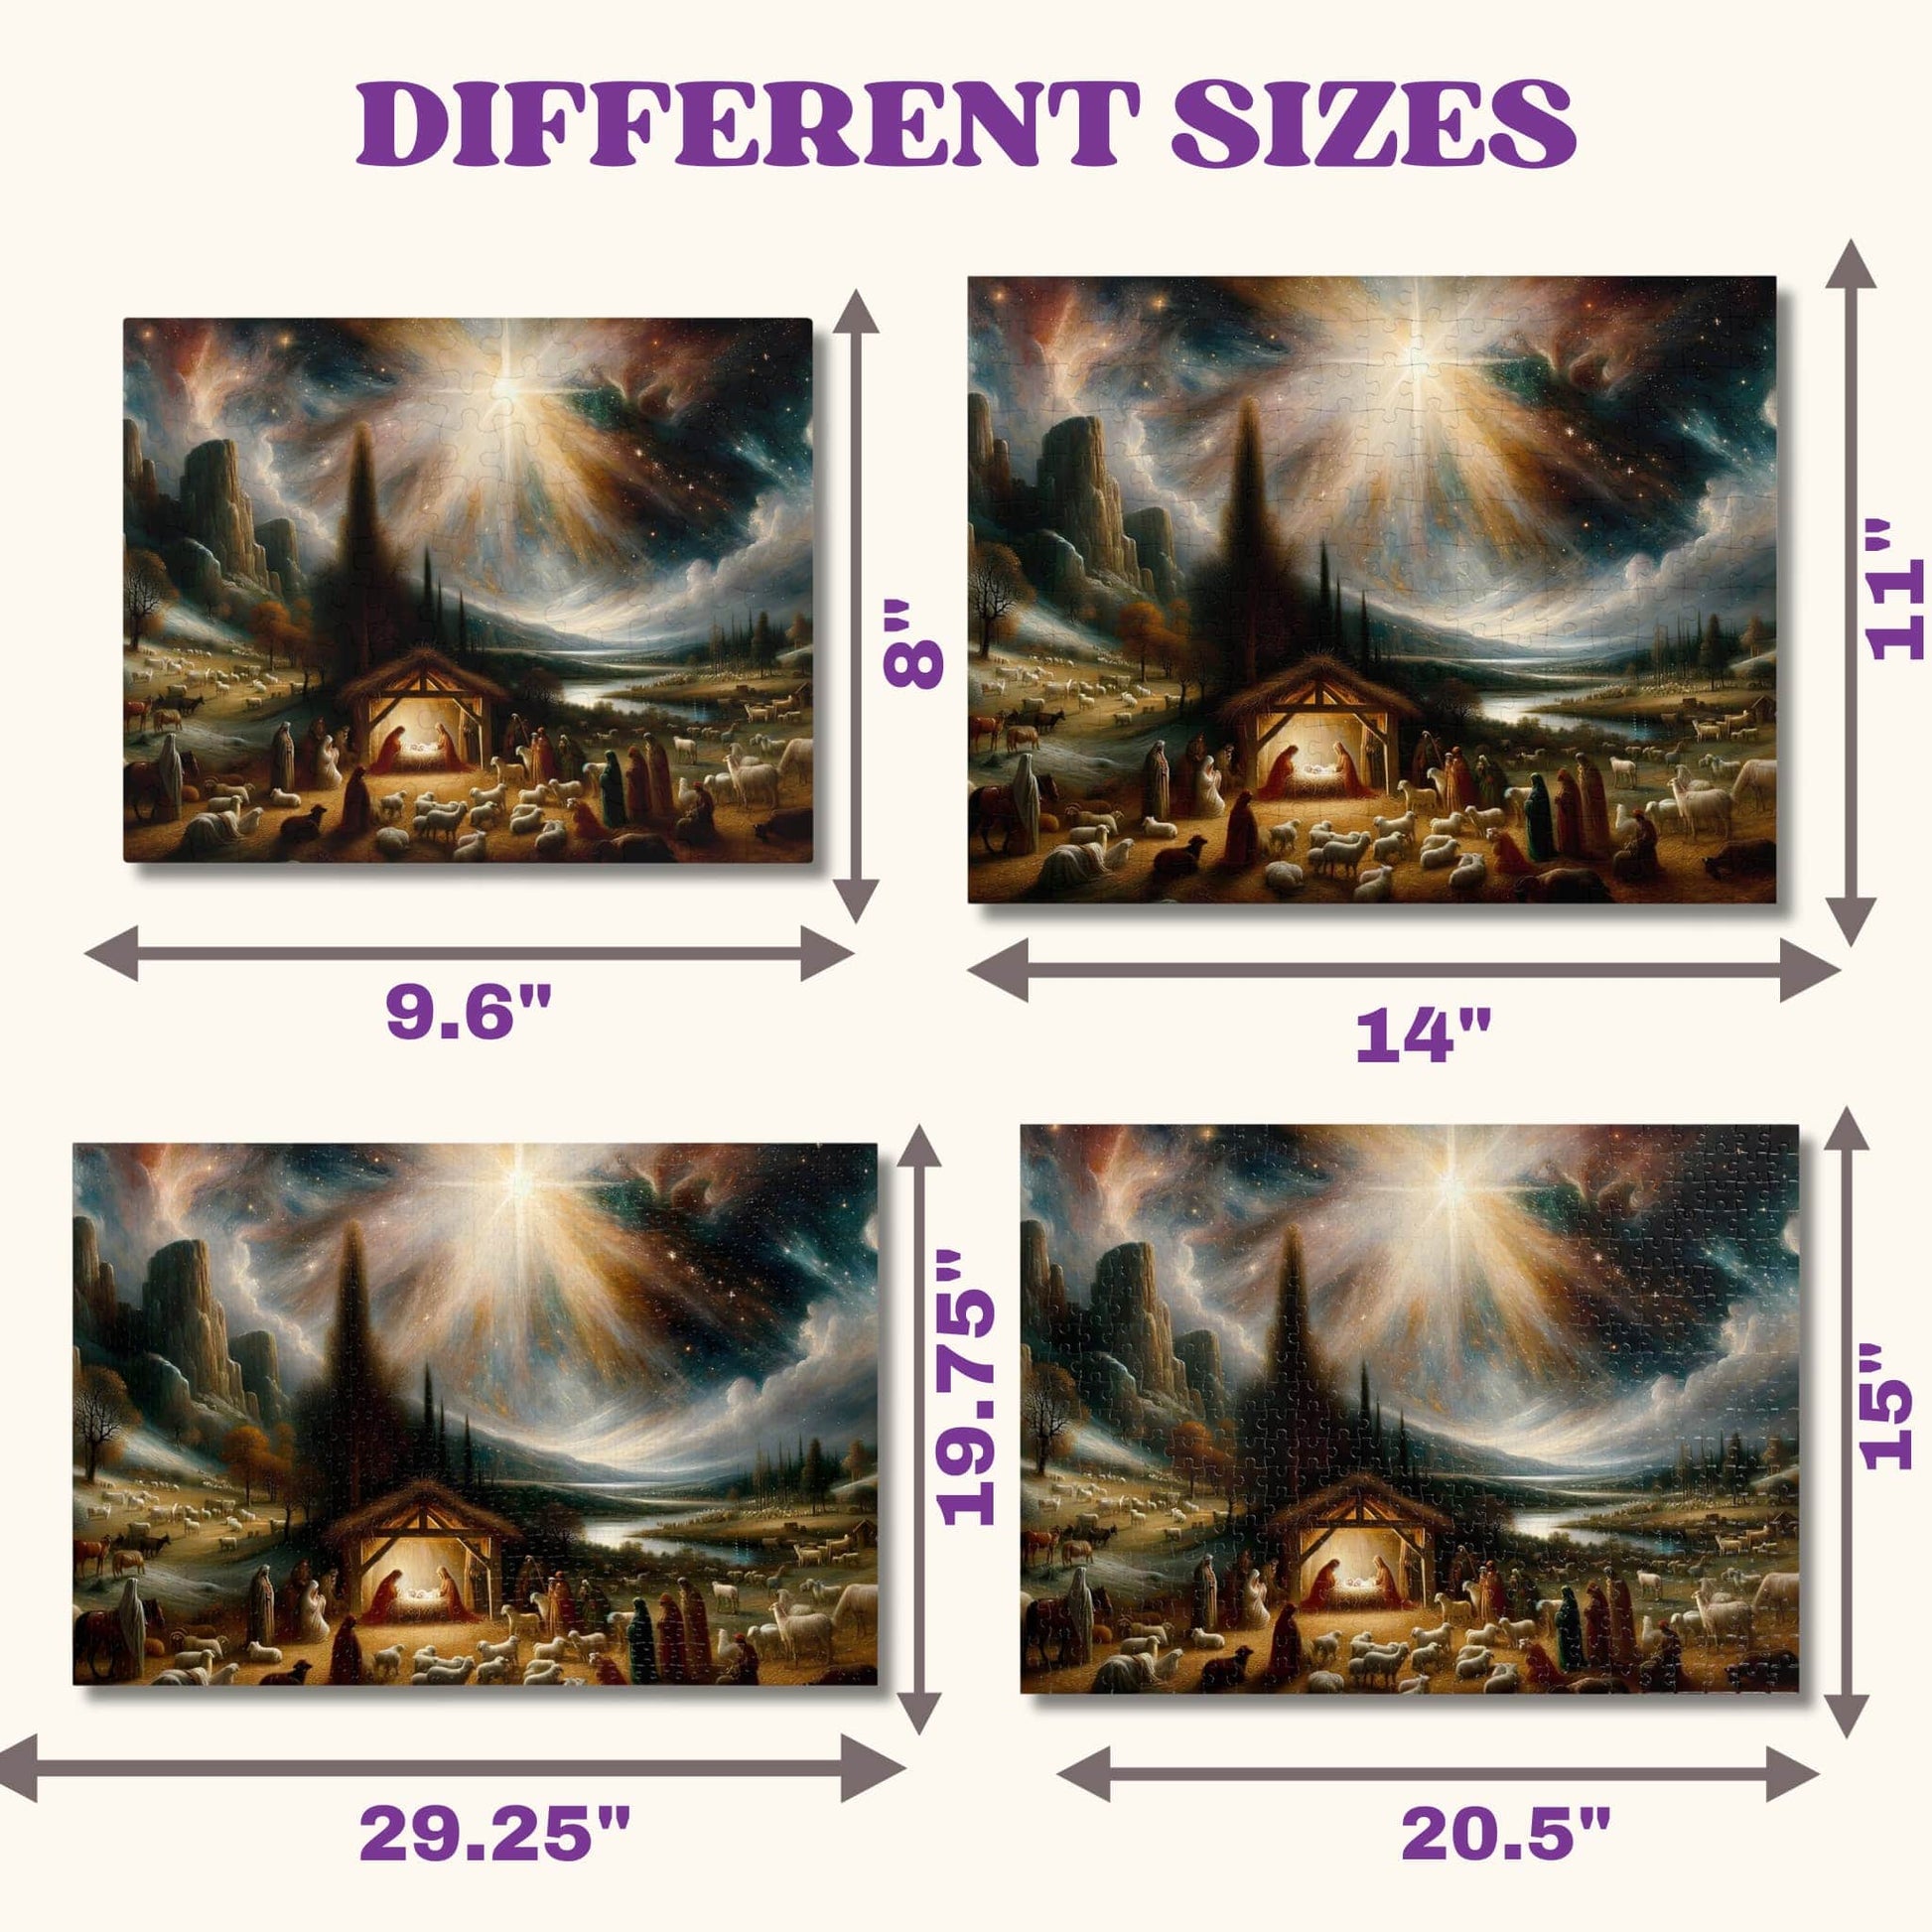 Different sizes of the Oil-Painted Nativity Scene Jigsaw Puzzles featuring 110, 252, 500, and 1000 pieces.